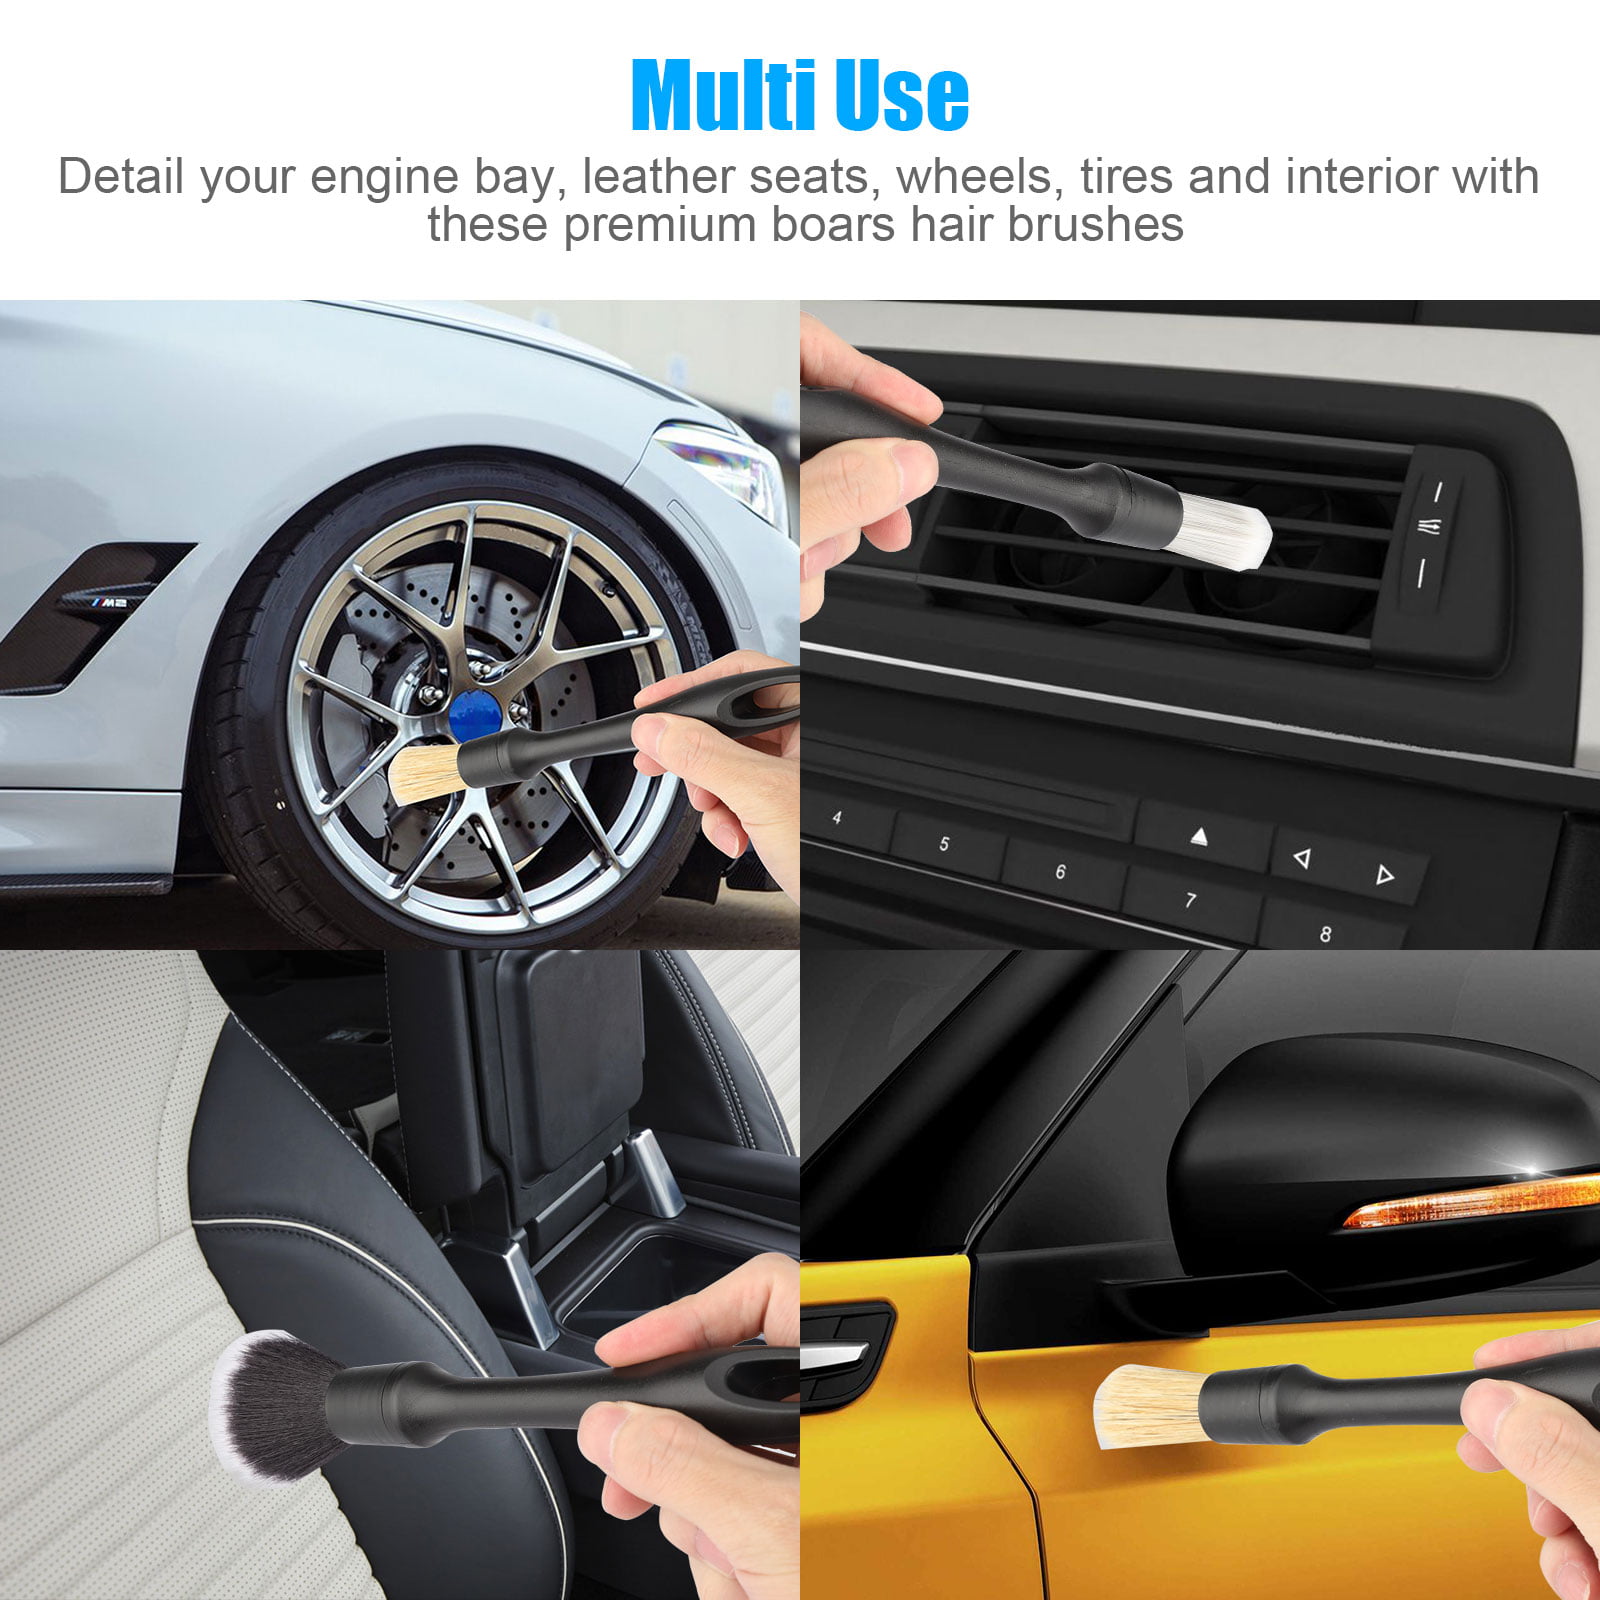 3Pcs Car Detailing Brush Set, EEEkit Car Detail Brush Kit with Fiber Soft  Boars Hair, Detailing Brushes Cleaning for Interior or Exterior, Air Vents,  Emblems Wheels, Engine Bay, Leather Seats 